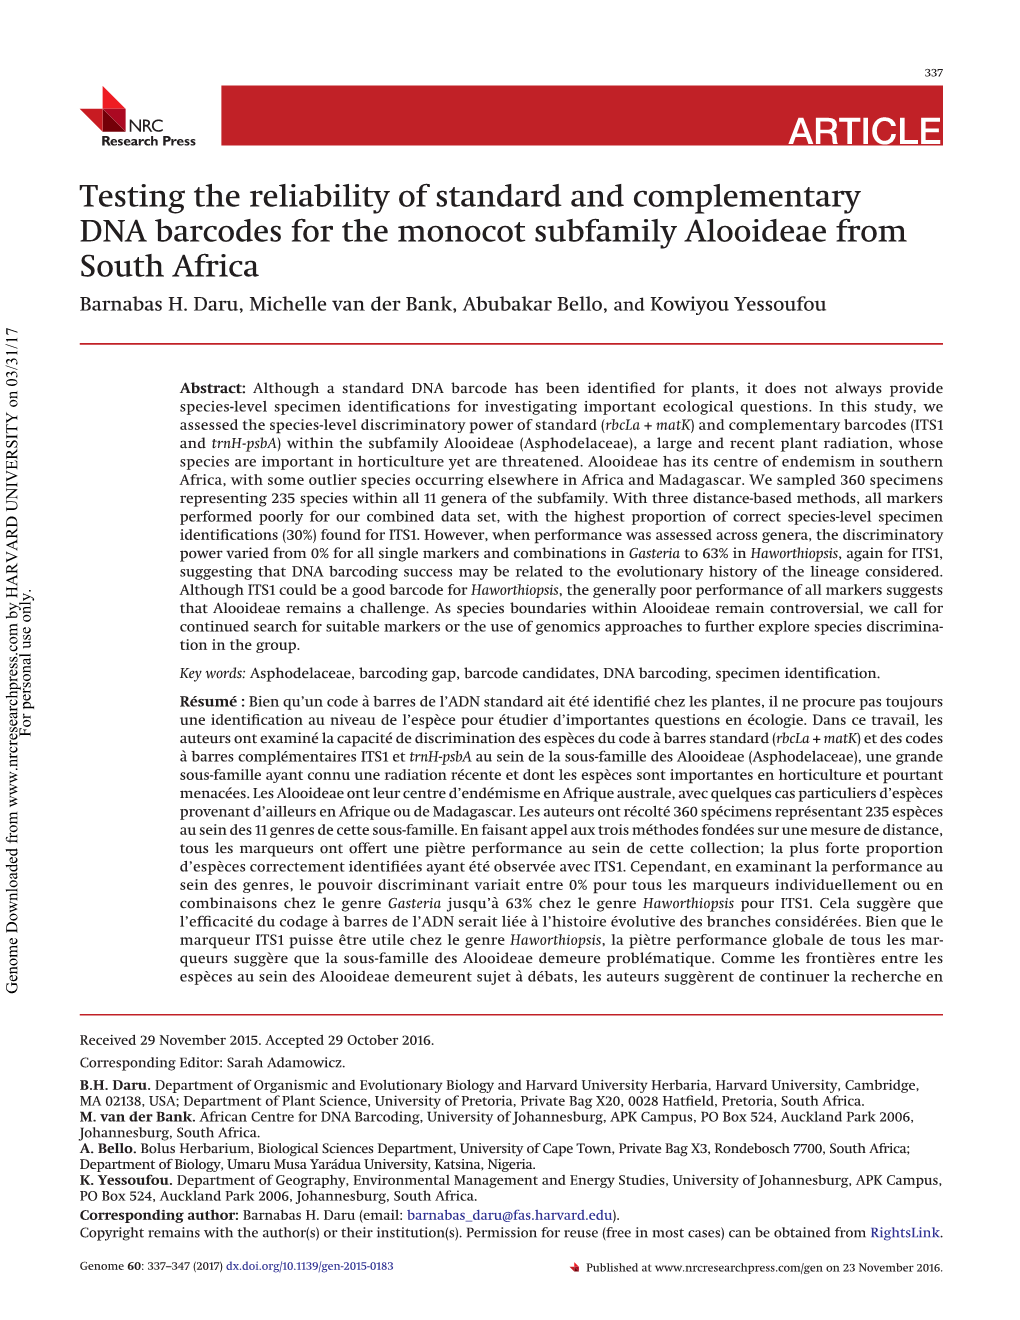 Testing the Reliability of Standard and Complementary DNA Barcodes for the Monocot Subfamily Alooideae from South Africa Barnabas H